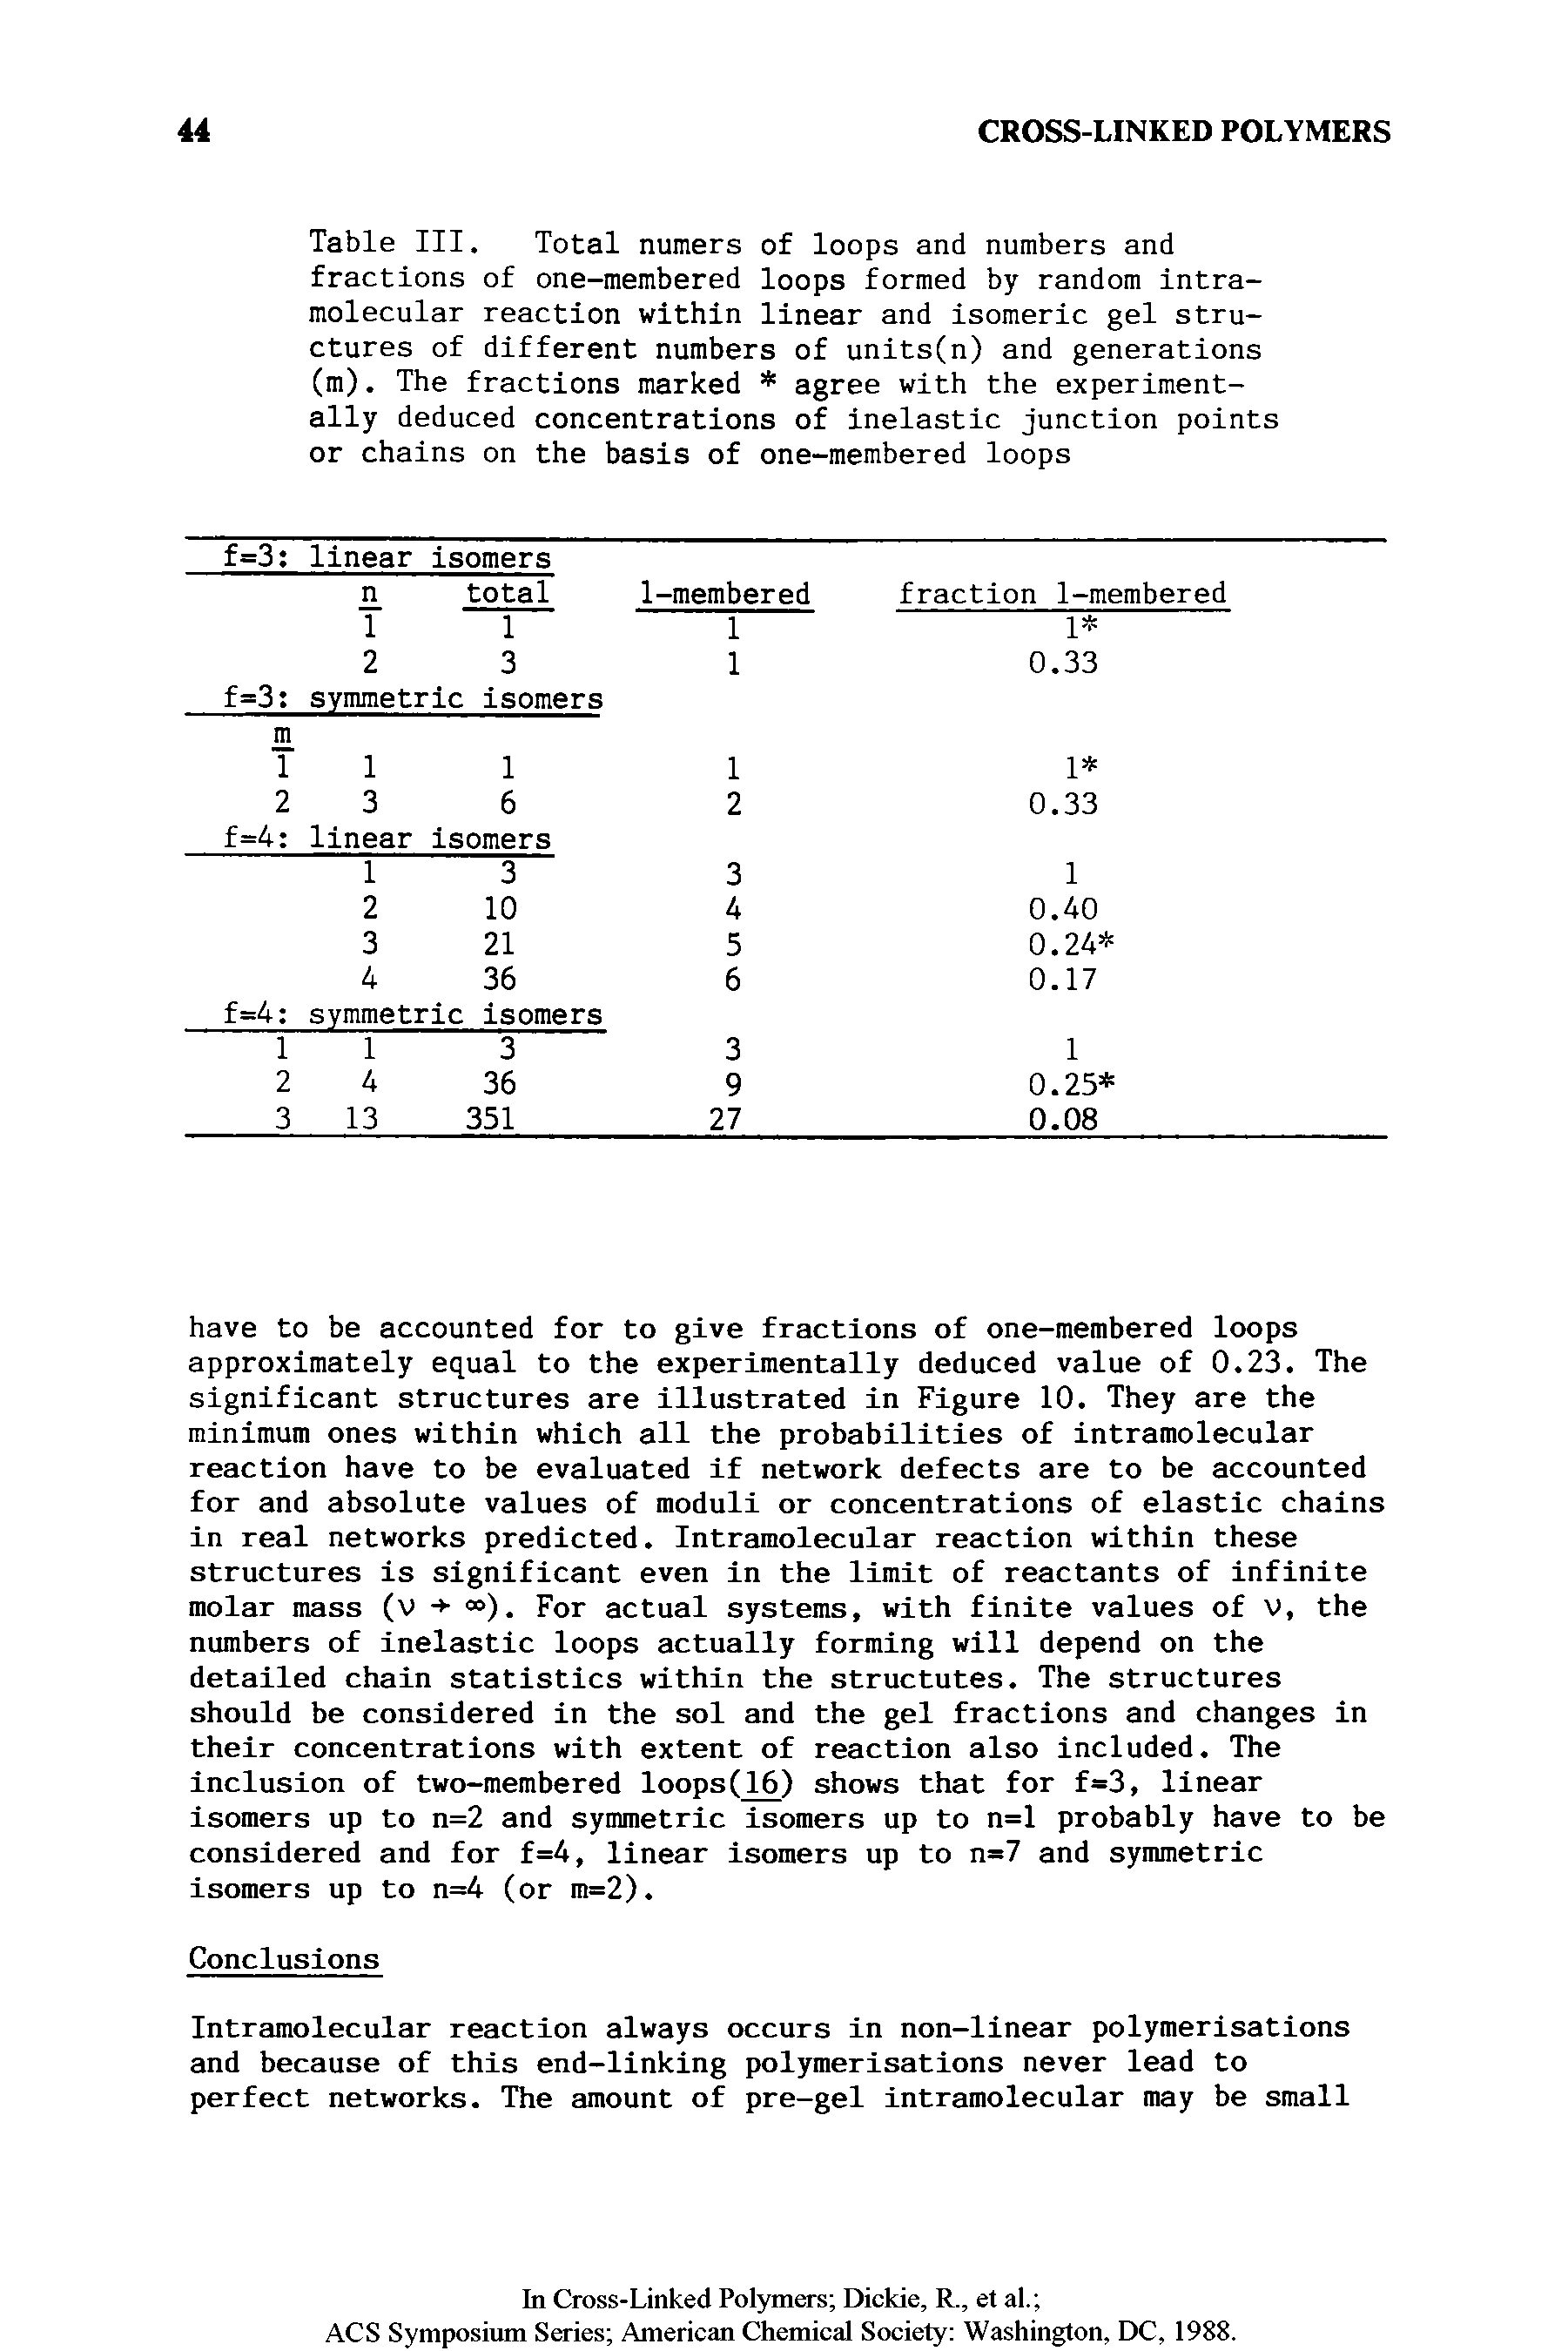 Table III. Total numers of loops and numbers and fractions of one-membered loops formed by random intramolecular reaction within linear and isomeric gel structures of different numbers of units(n) and generations (m). The fractions marked agree with the experimentally deduced concentrations of inelastic junction points or chains on the basis of one-membered loops...